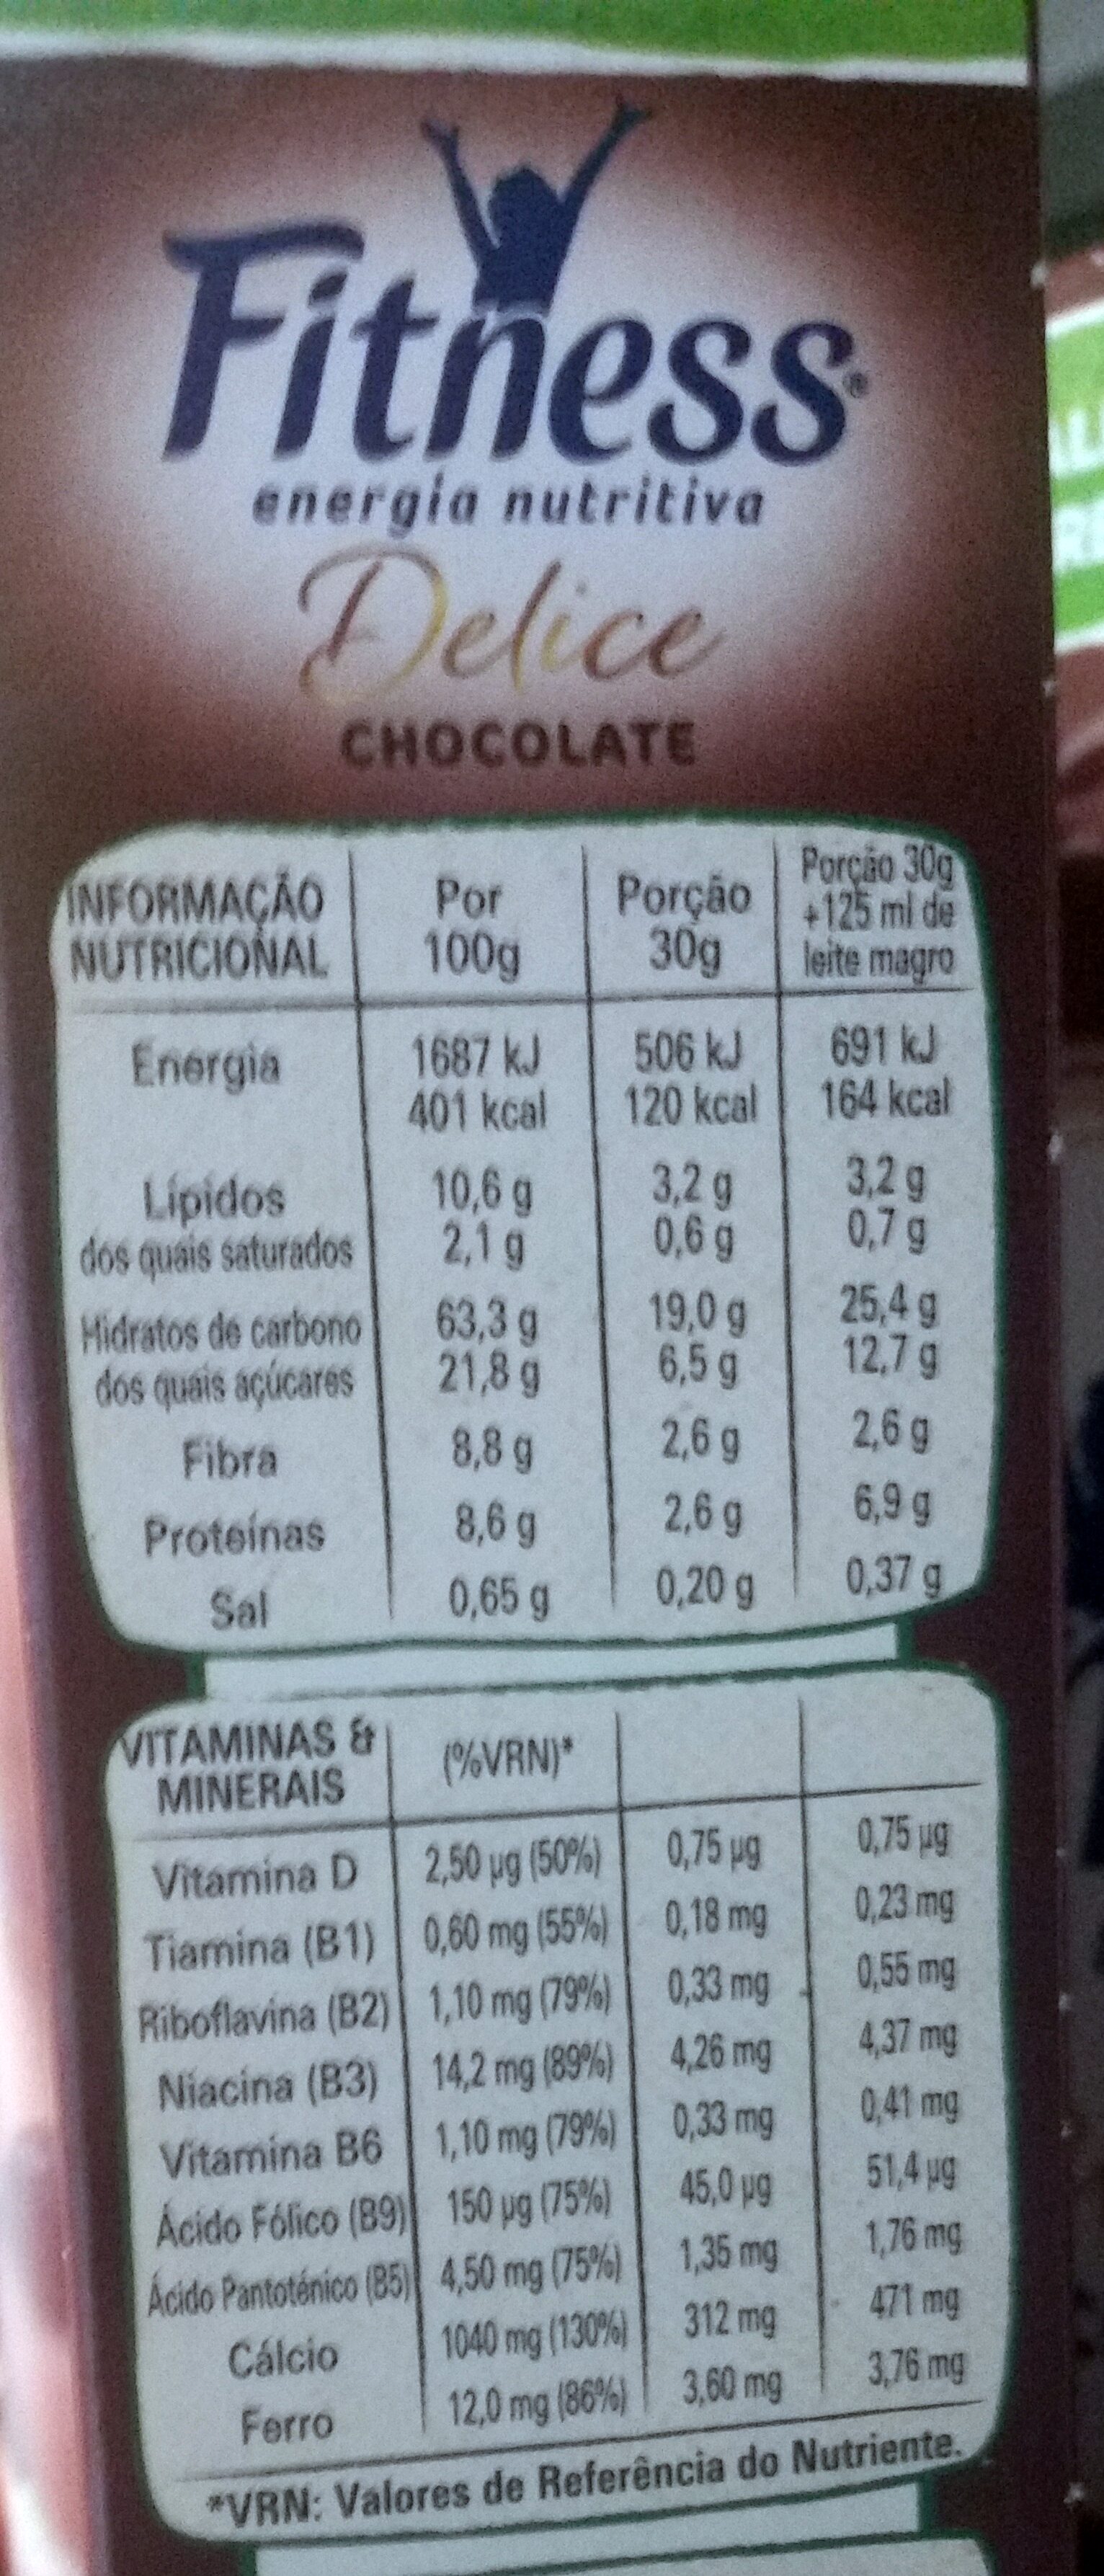 Fitness delice chocolate - Nutrition facts - es